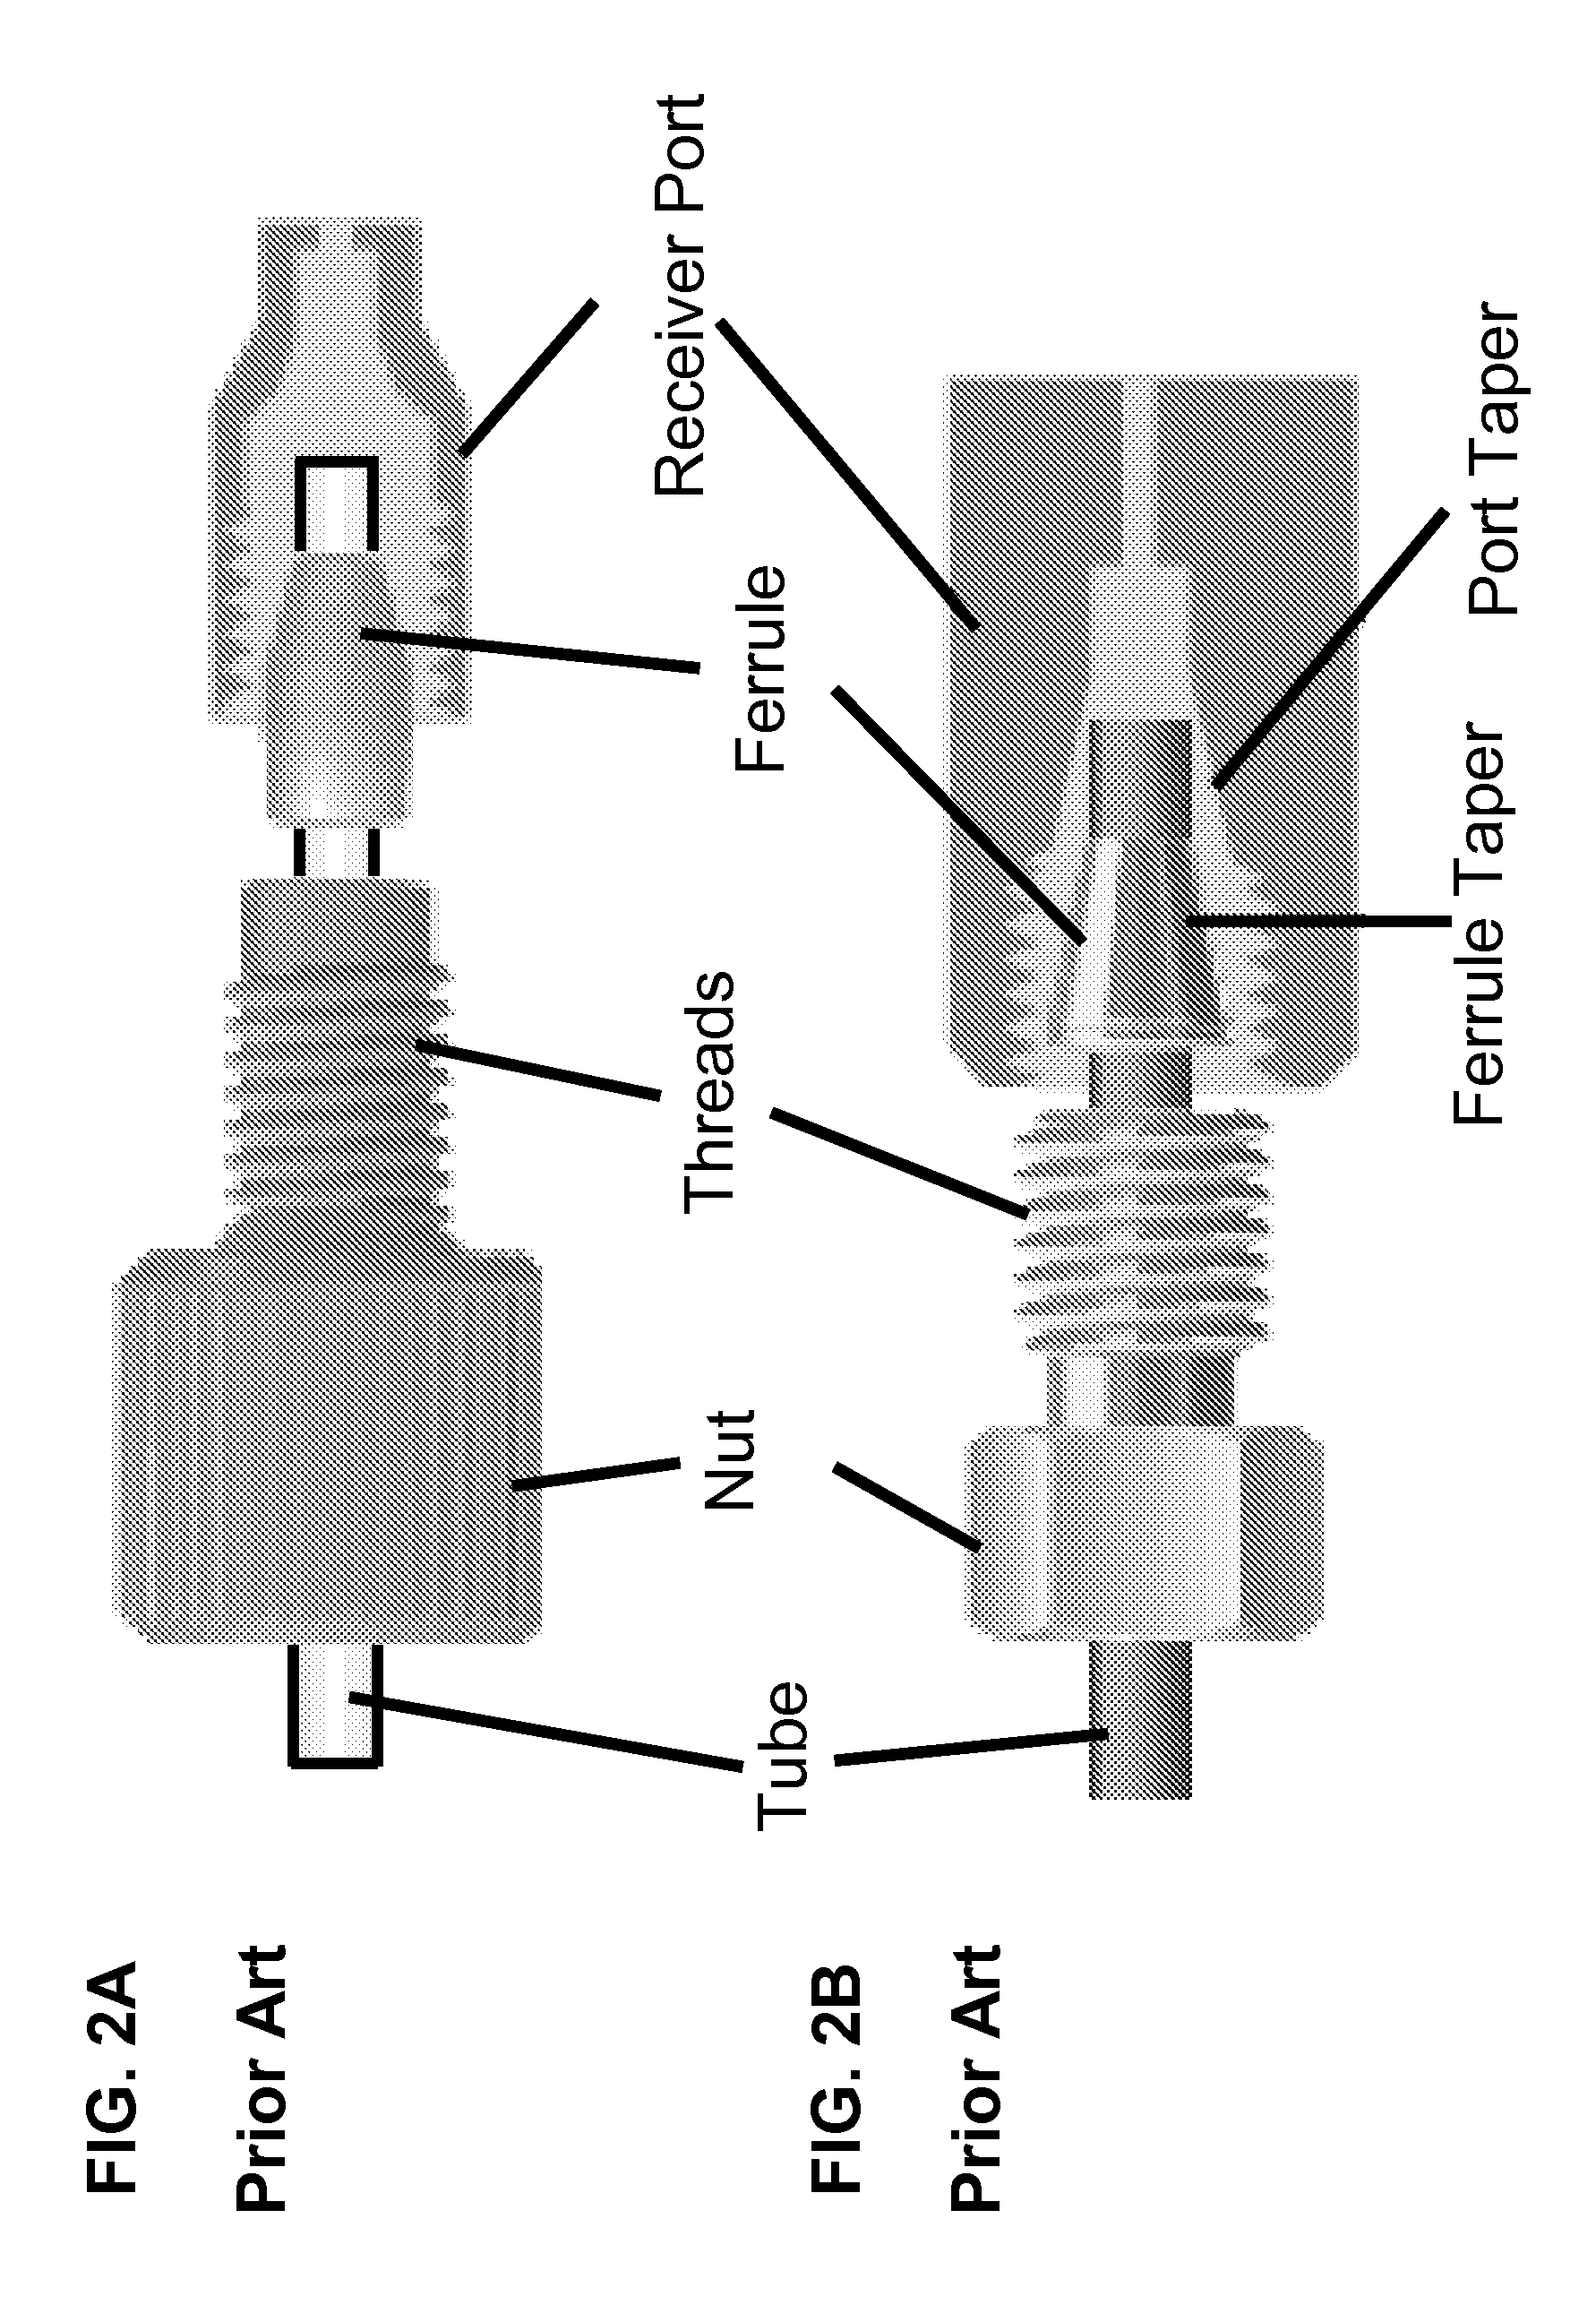 Nanoliter flow rate separation and electrospray device with plug and play high pressure connections and multi-sensor diagnostic monitoring system